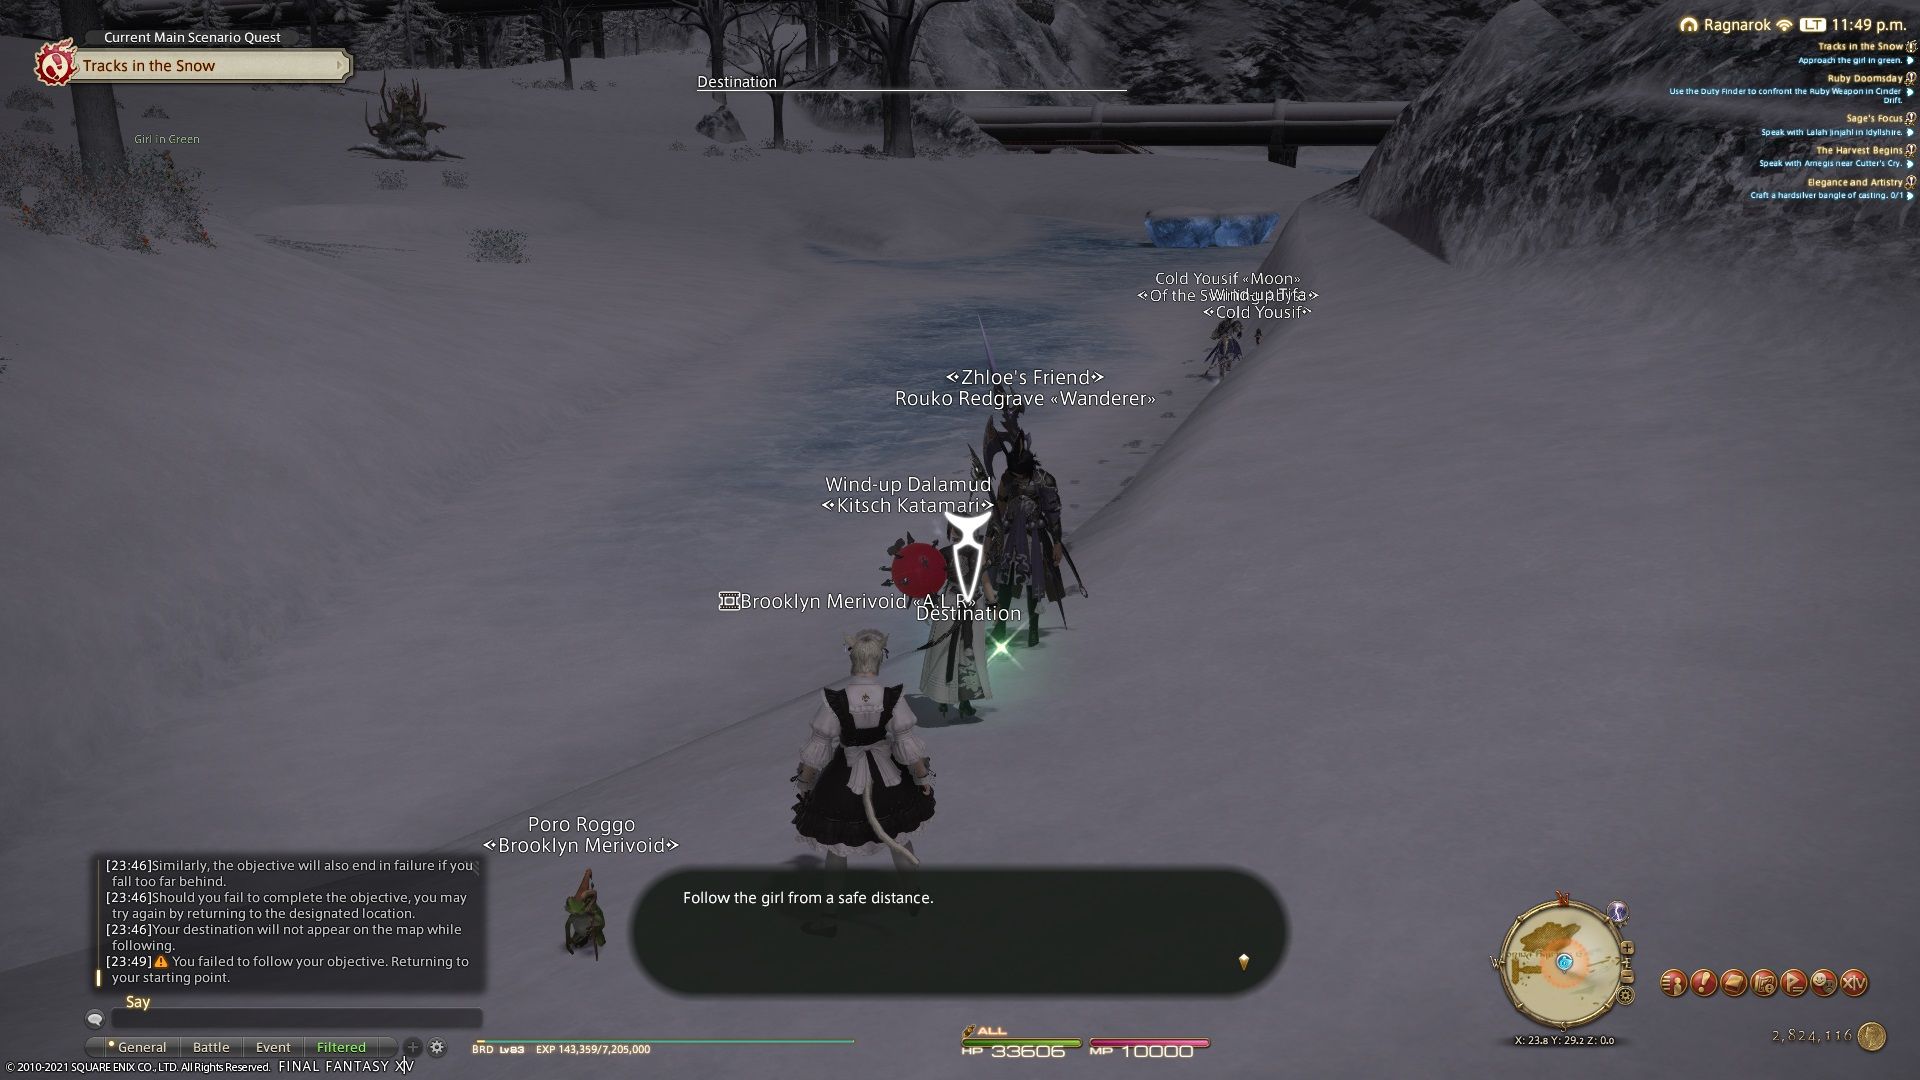 FF14 Tracks in the snow main scenario quest starting point